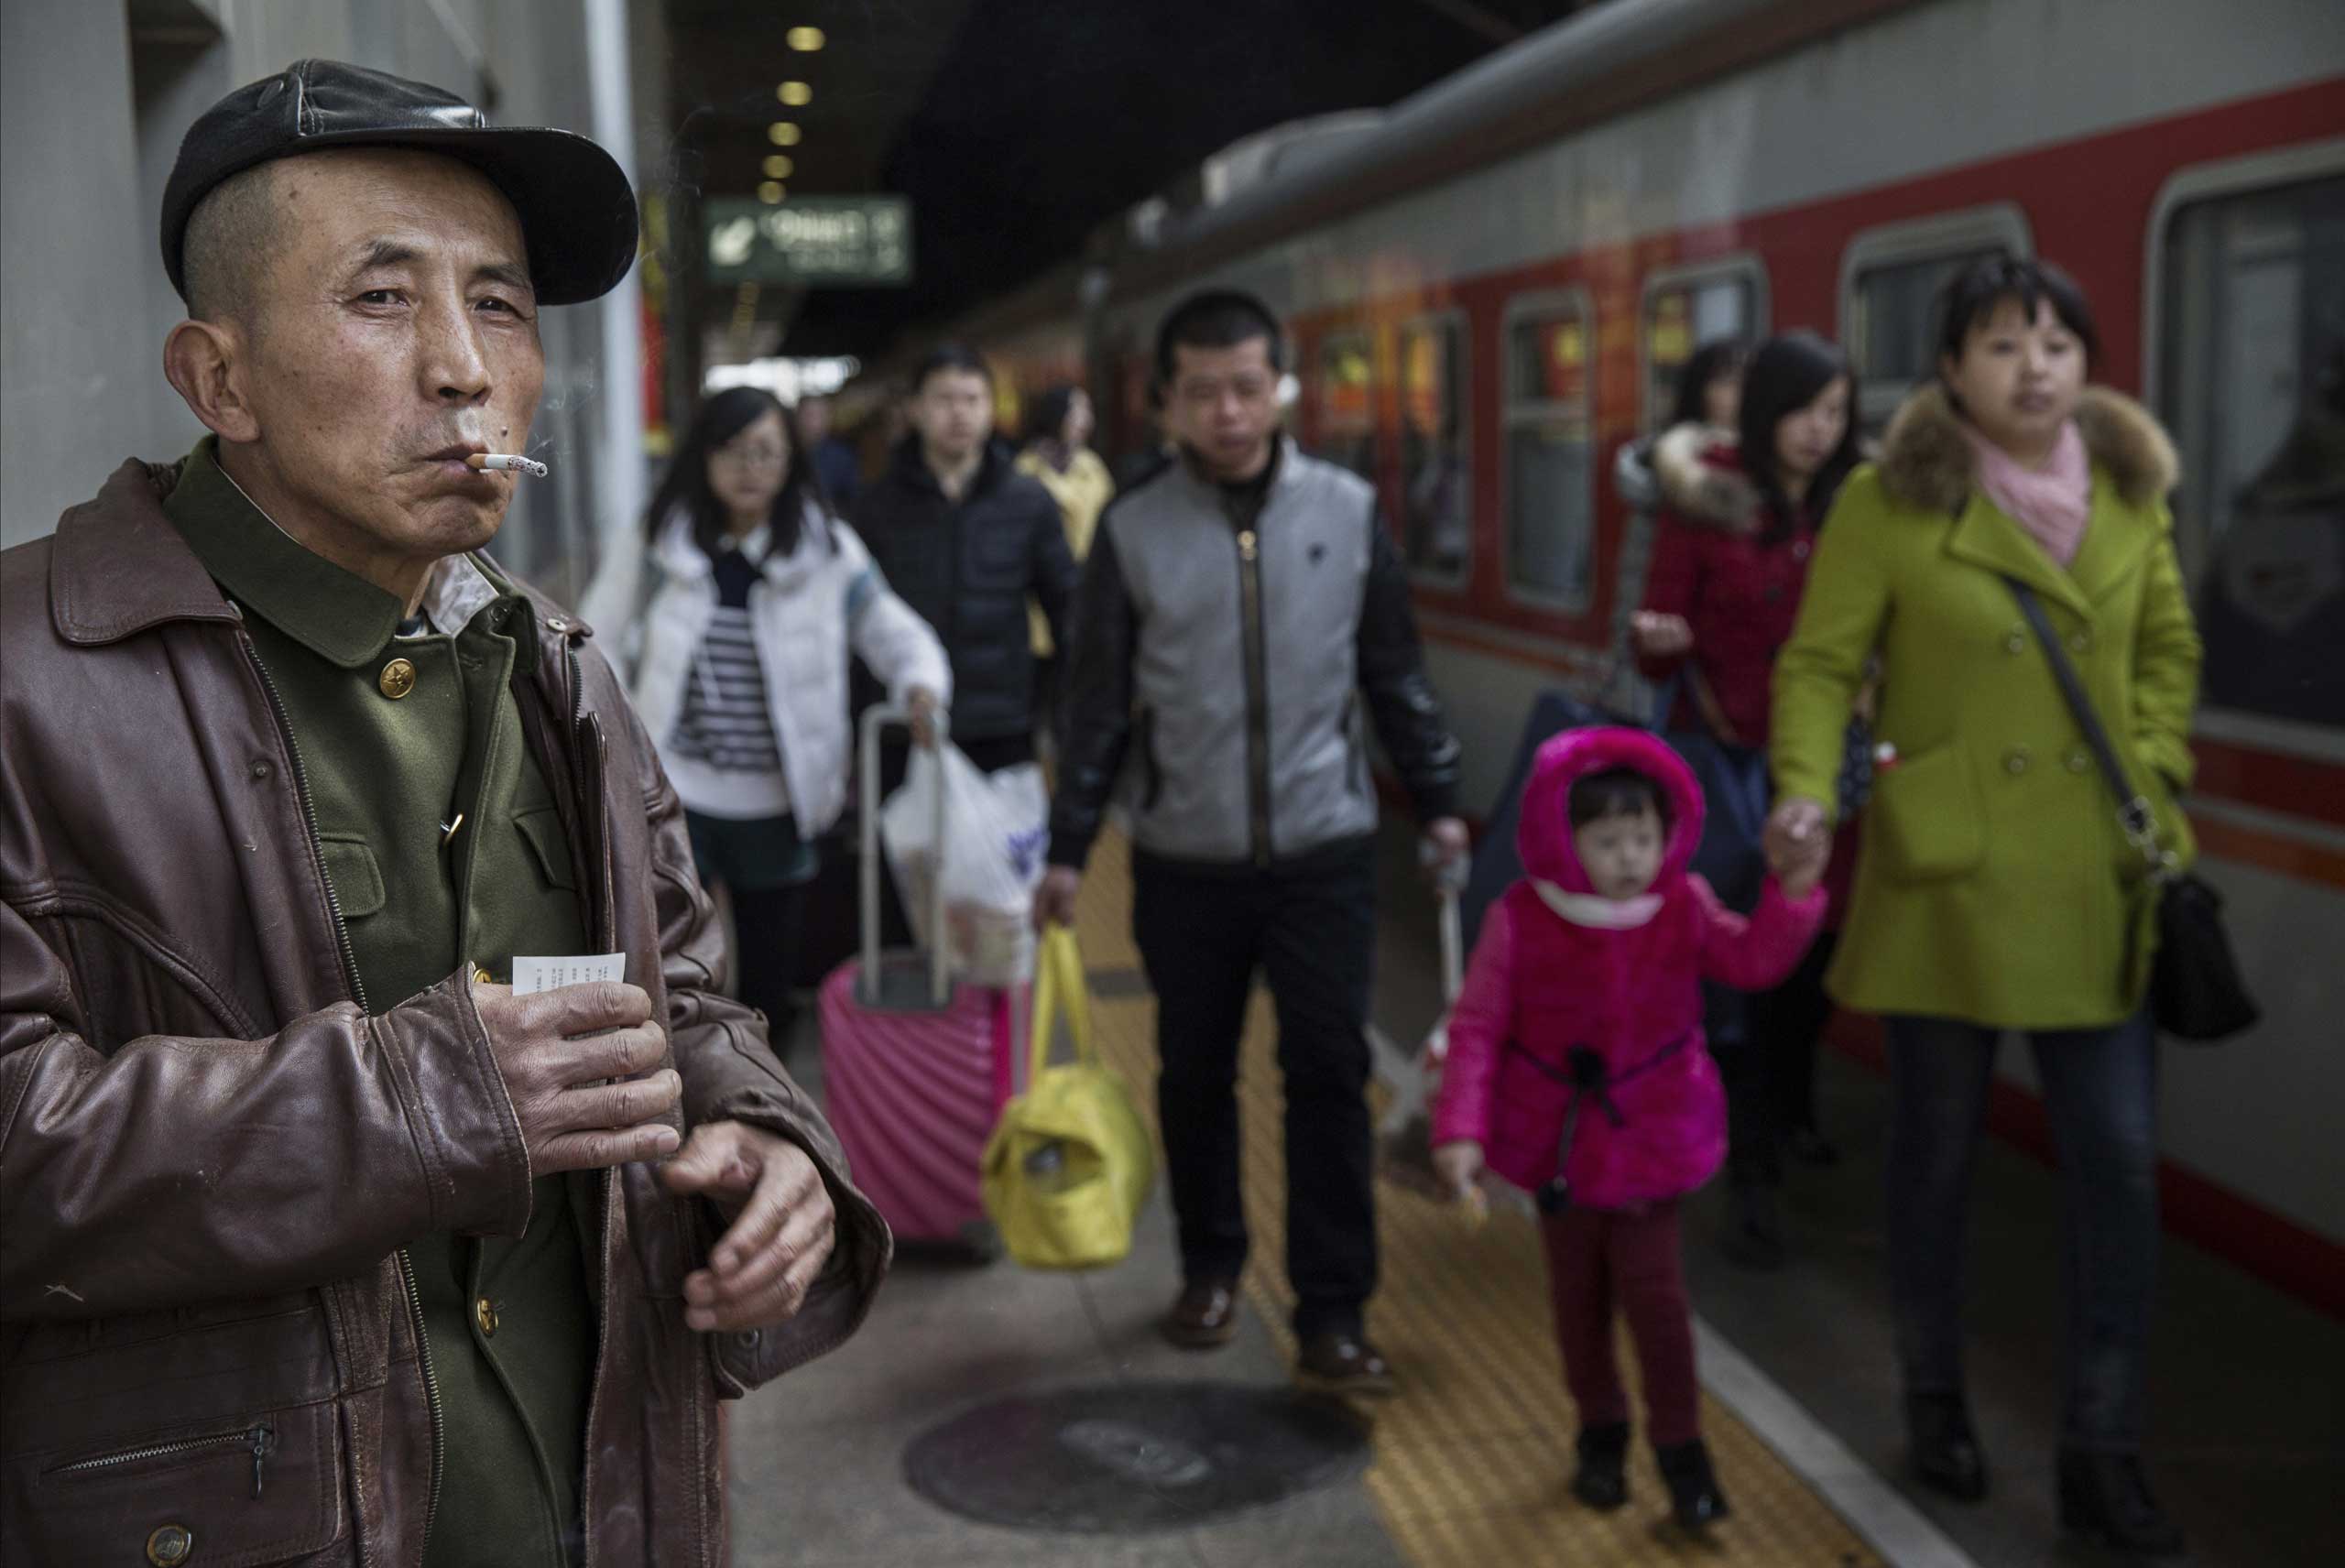 A traveler smokes as he and others prepare to board a train while leaving for the Spring Festival at a local railway station on Feb. 17, 2015 in Beijing.